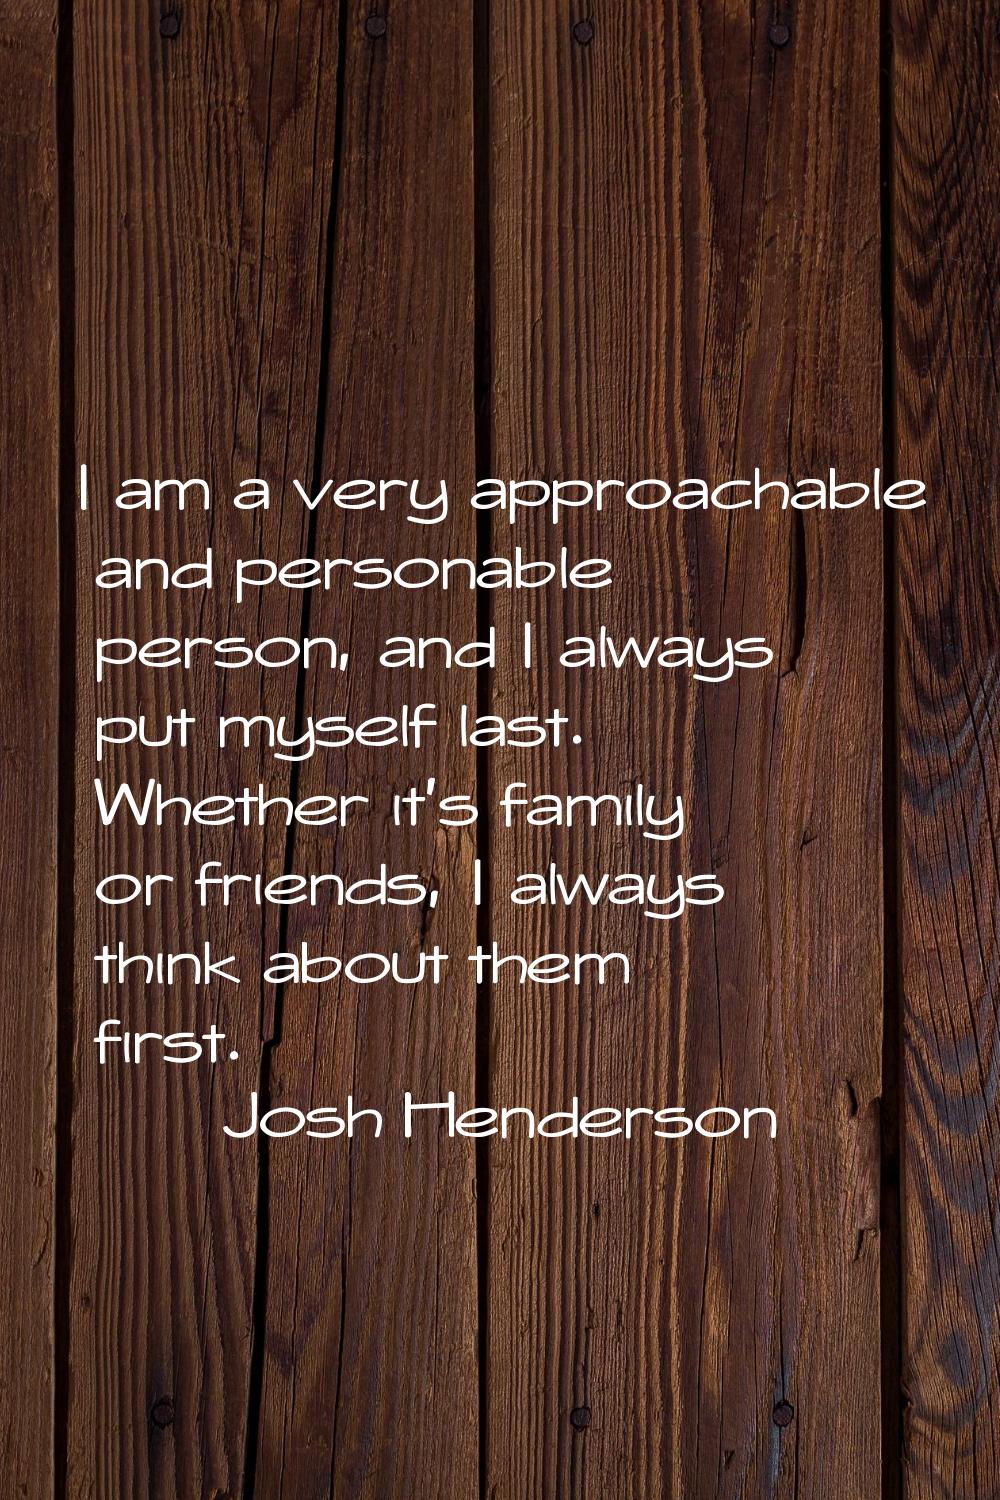 I am a very approachable and personable person, and I always put myself last. Whether it's family o